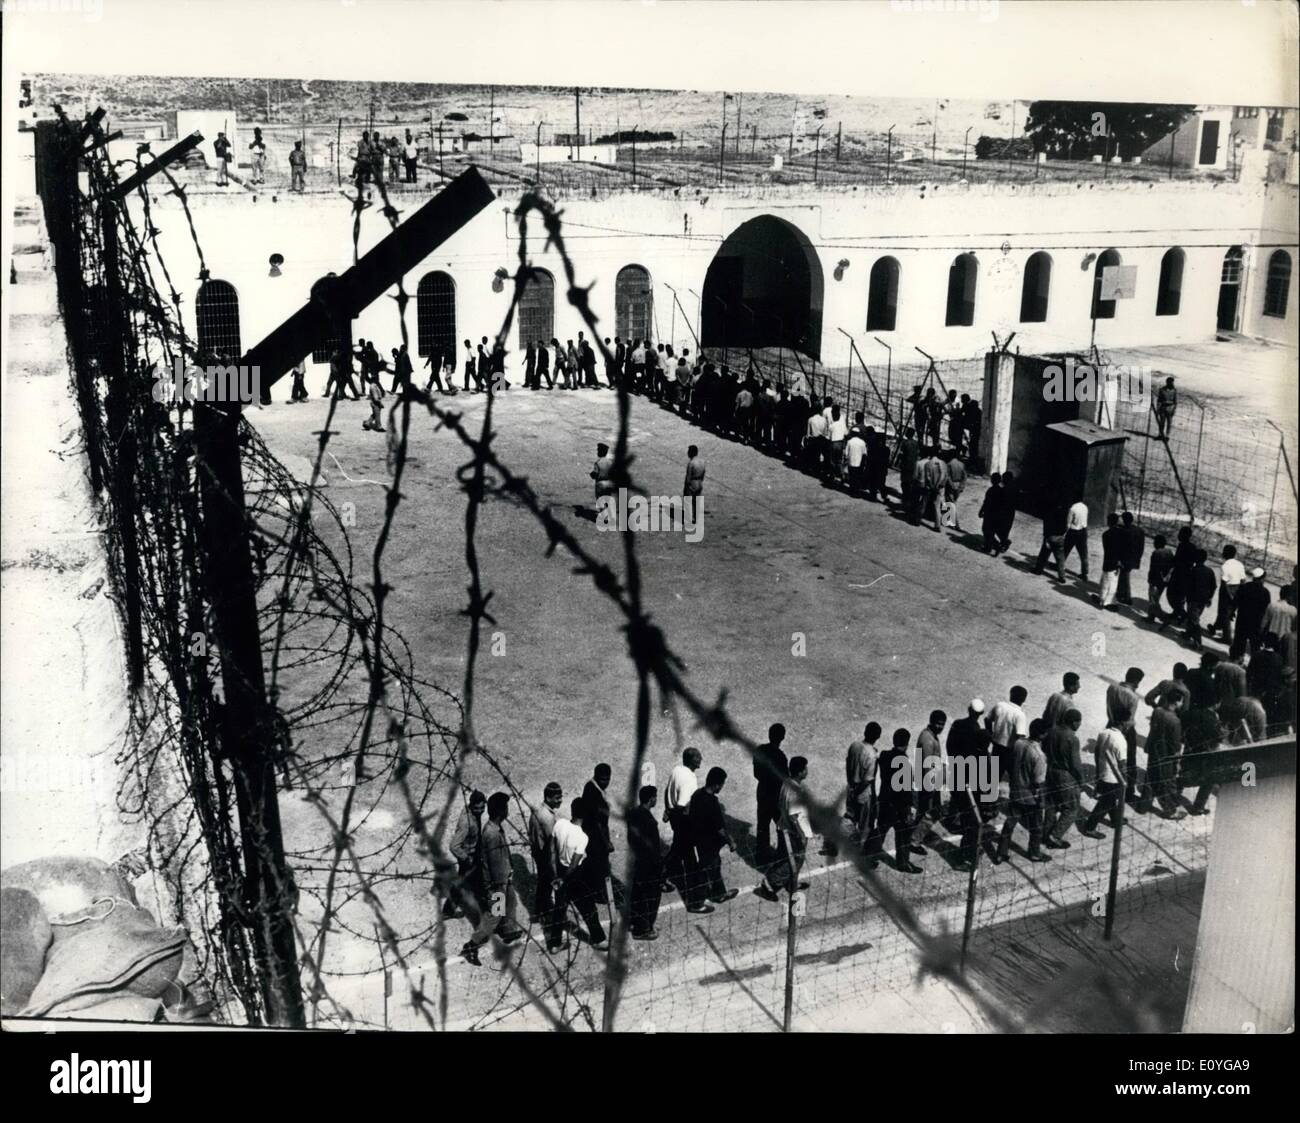 Apr. 04, 1970 - Israel maintains Prison conditions are proper: In a report released by Amnesty international of London, Israel was accused of mistreating Arab prisoners by way of beatings, electric shocks and cigarette burns, and they quoted case histories of certain persons. The Israel Foreign Ministry emphatically denied all these charges, and furnished Amnestry with detailed results of an investigation on the one section which contained names of complainants, which prove them to be totally unfounded Stock Photo